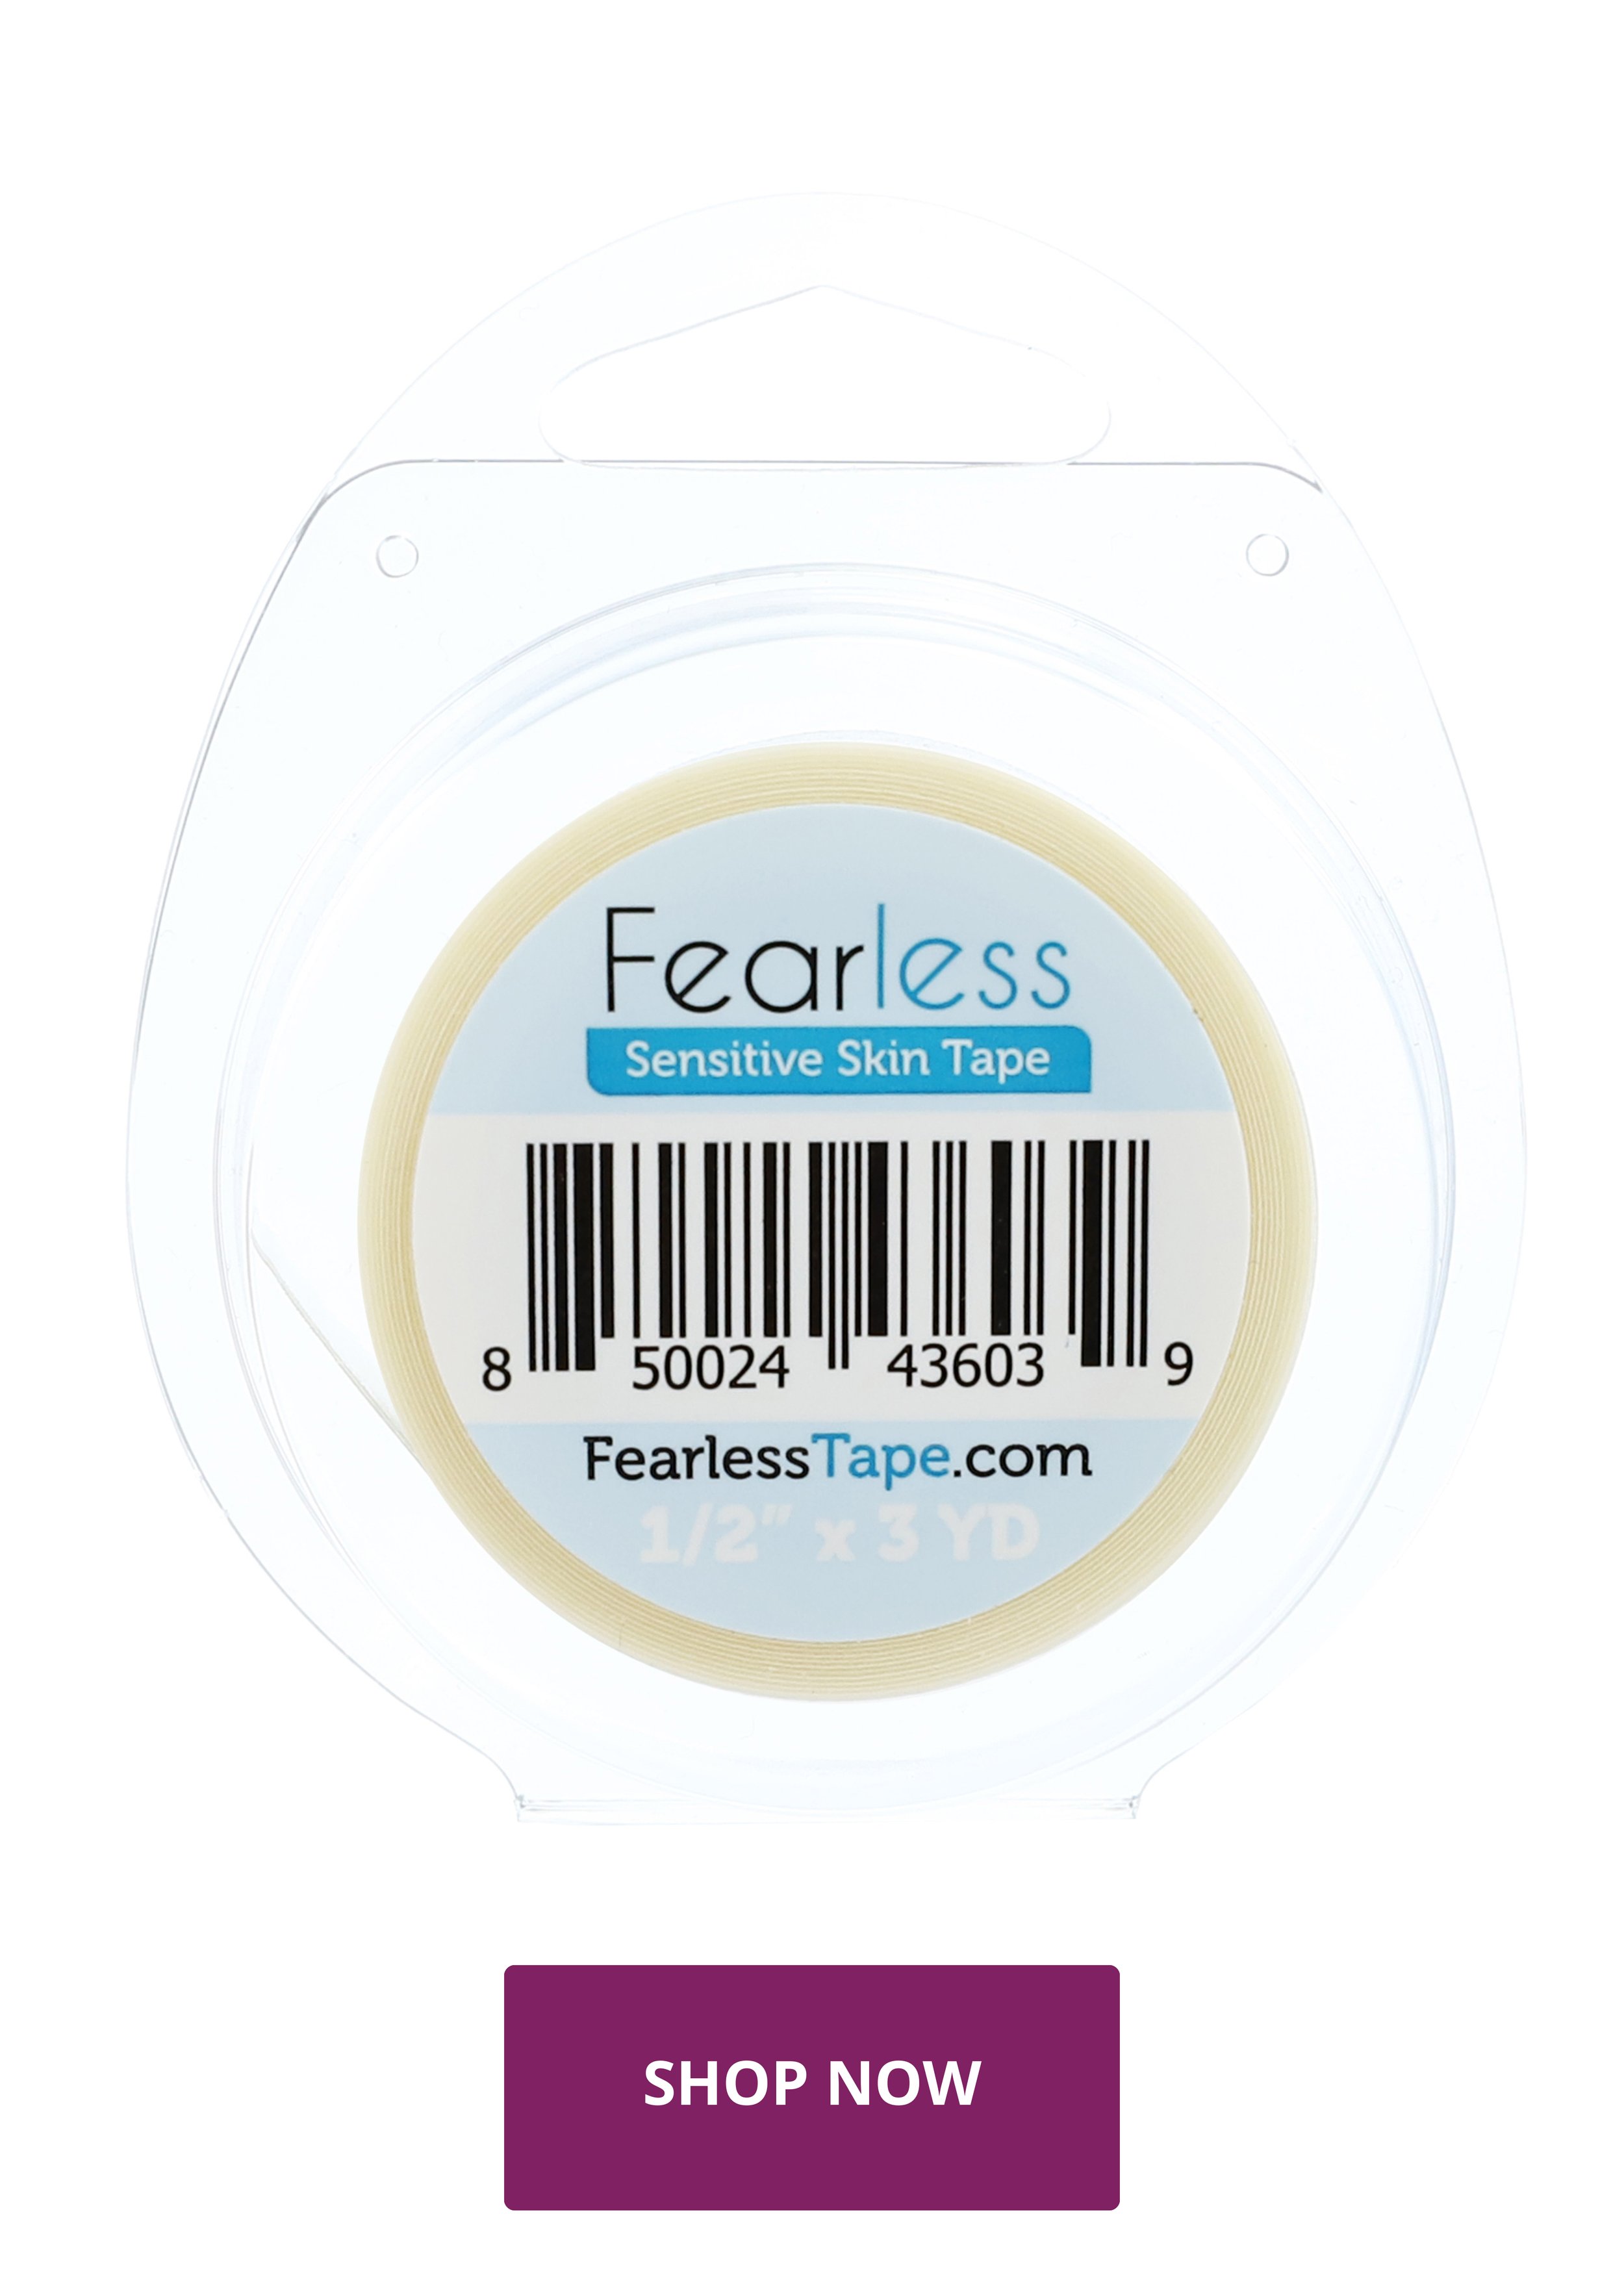 Fearless Tape: The Secret to a Flawless Wardrobe